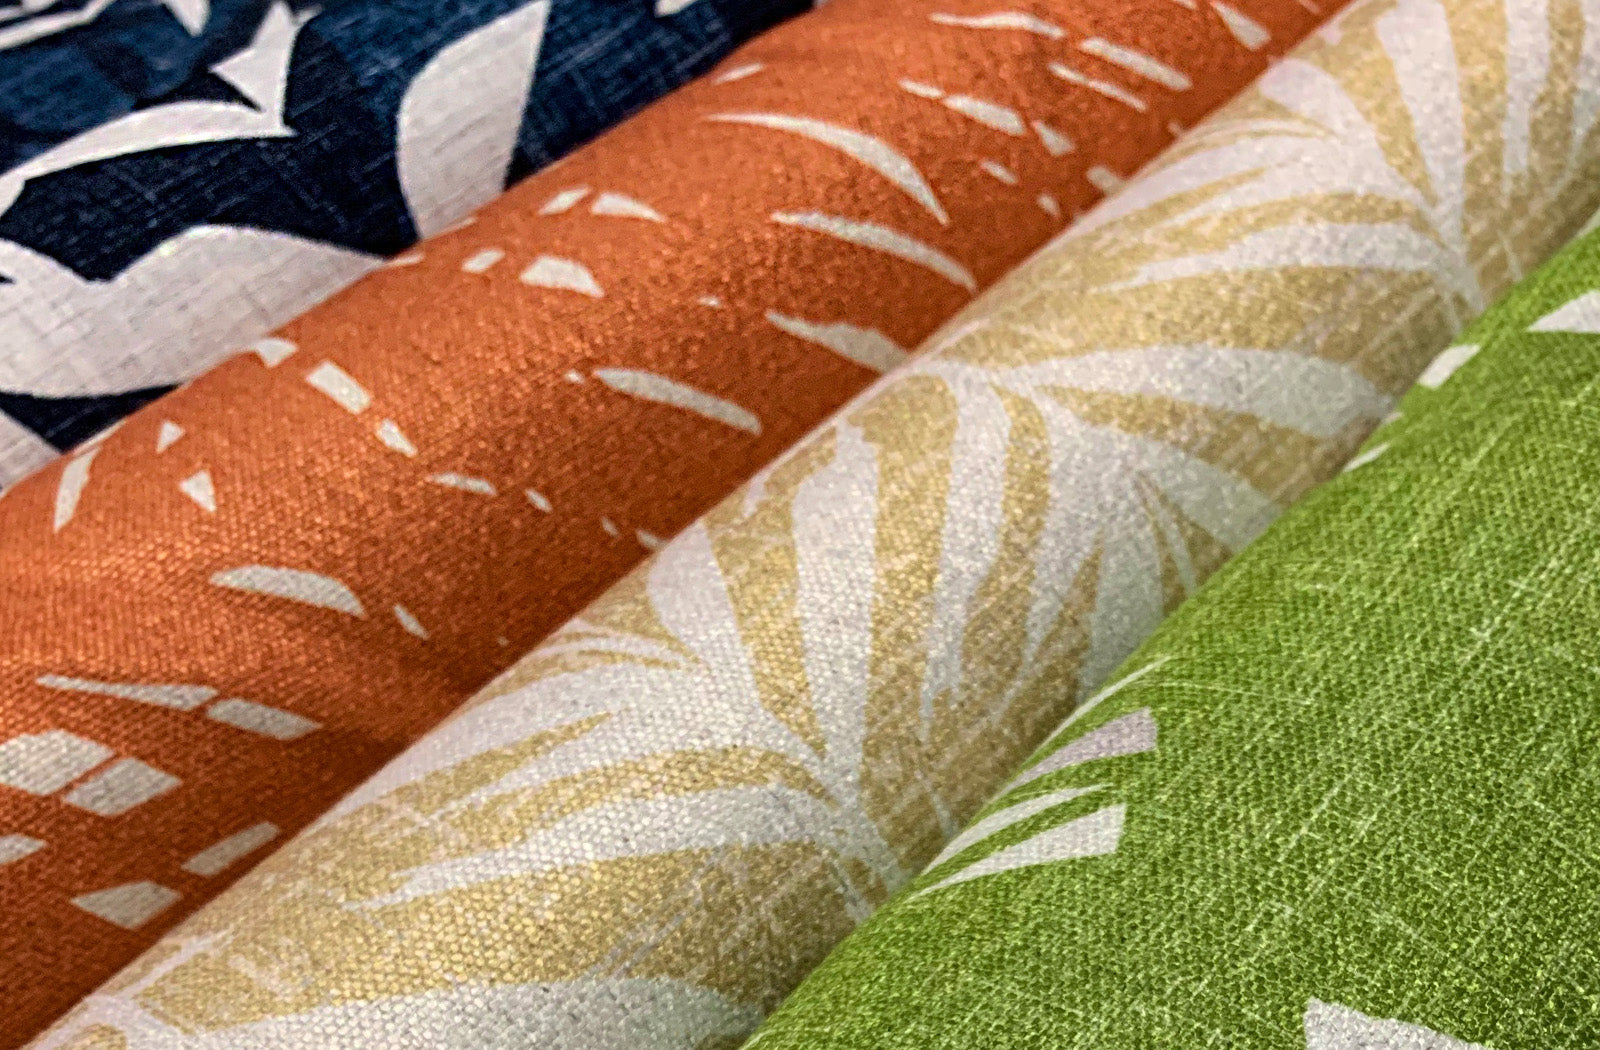 Wholesale and Trade Resources for Authentic Hawaiian Design Services Showcasing Hawaiian Print Fabrics in Orange, Tan and Green